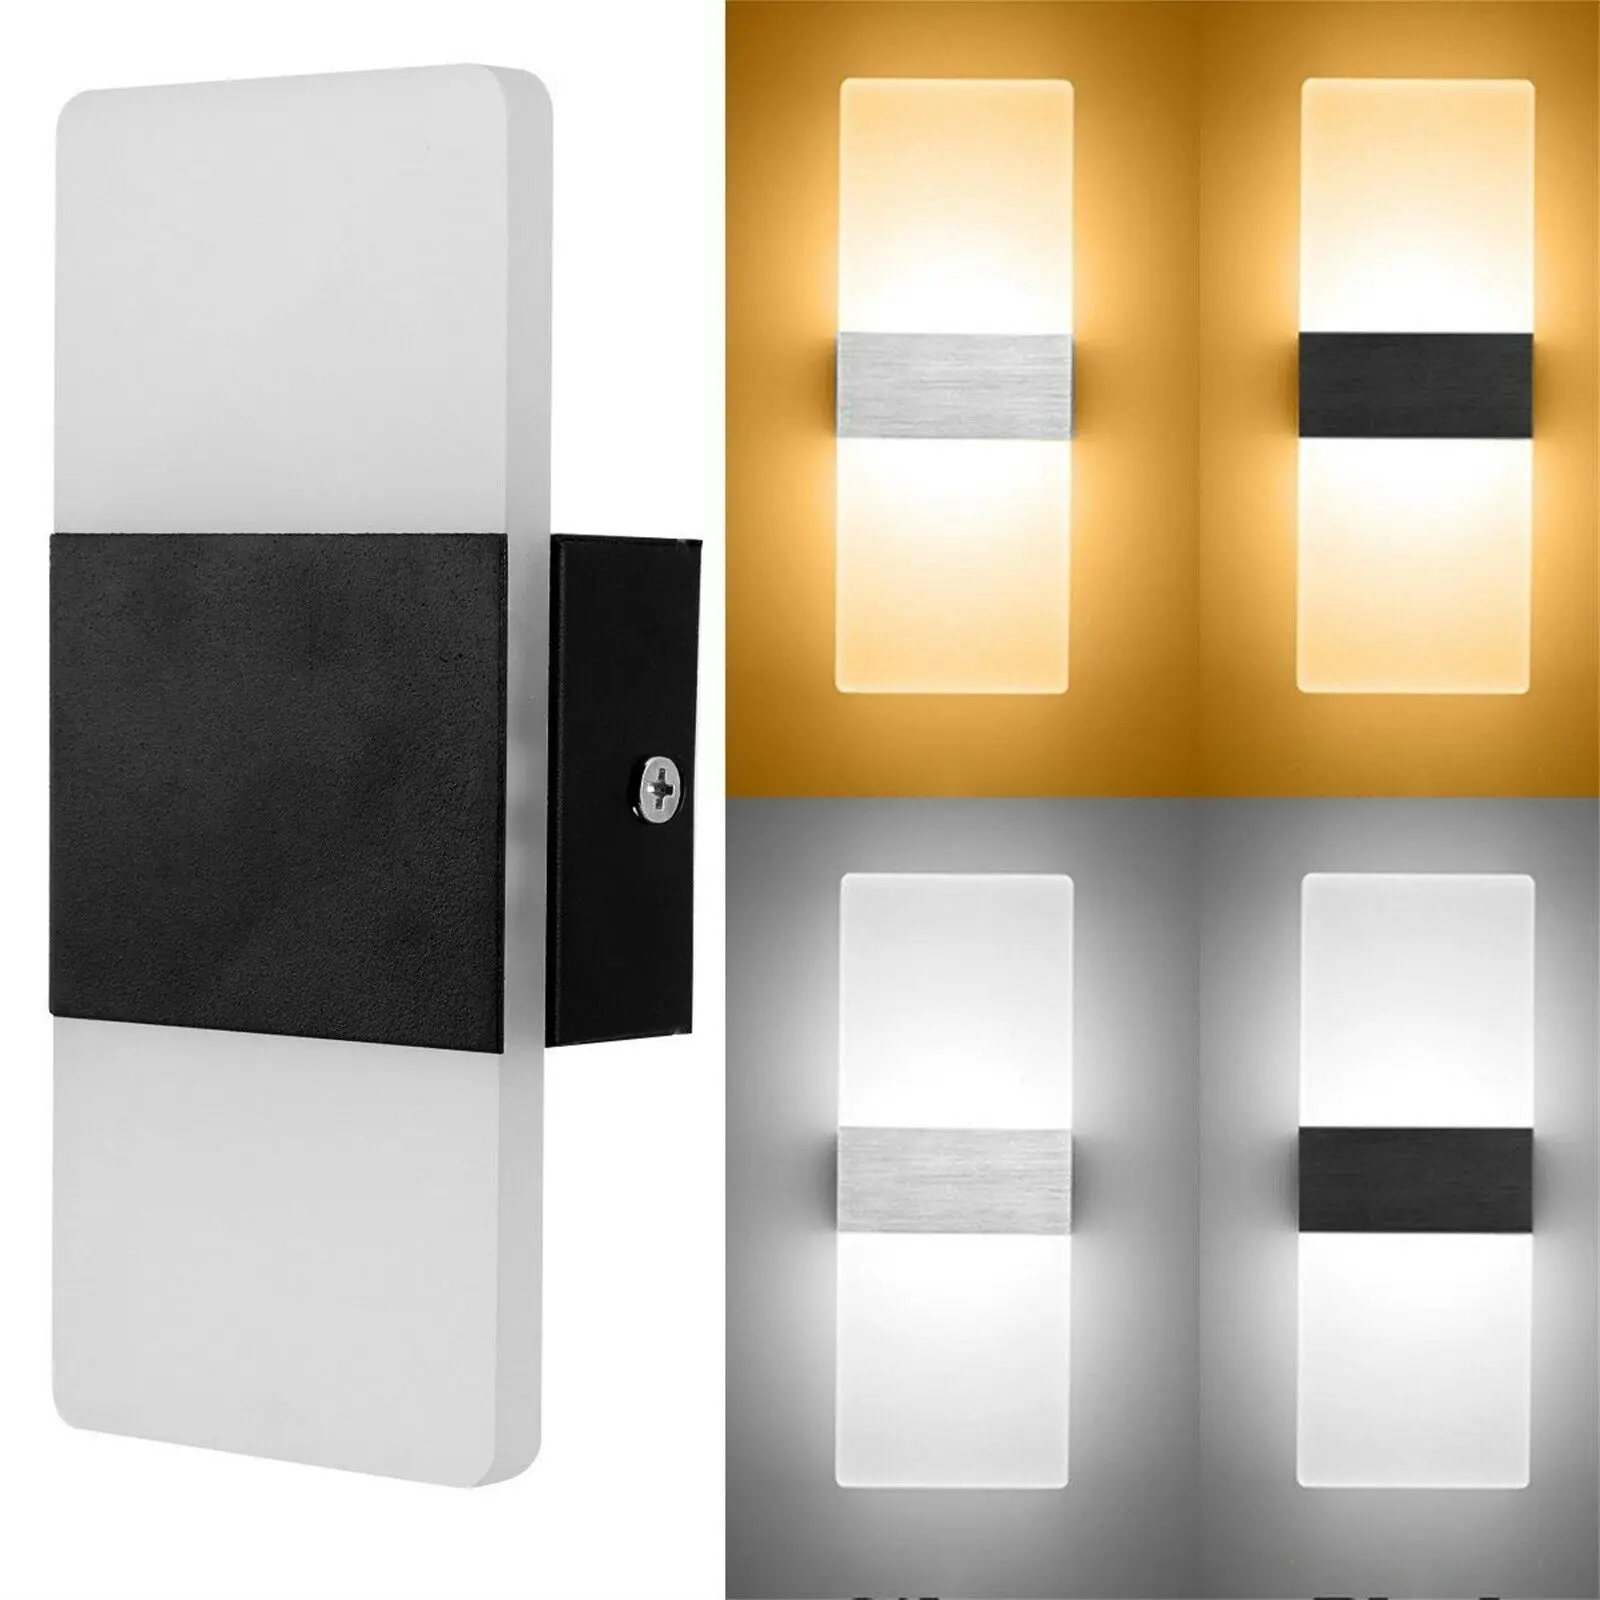 Modern LED Wall Light Up Down Cube Sconce Lighting Lamp Fixture Room Decor Mount 